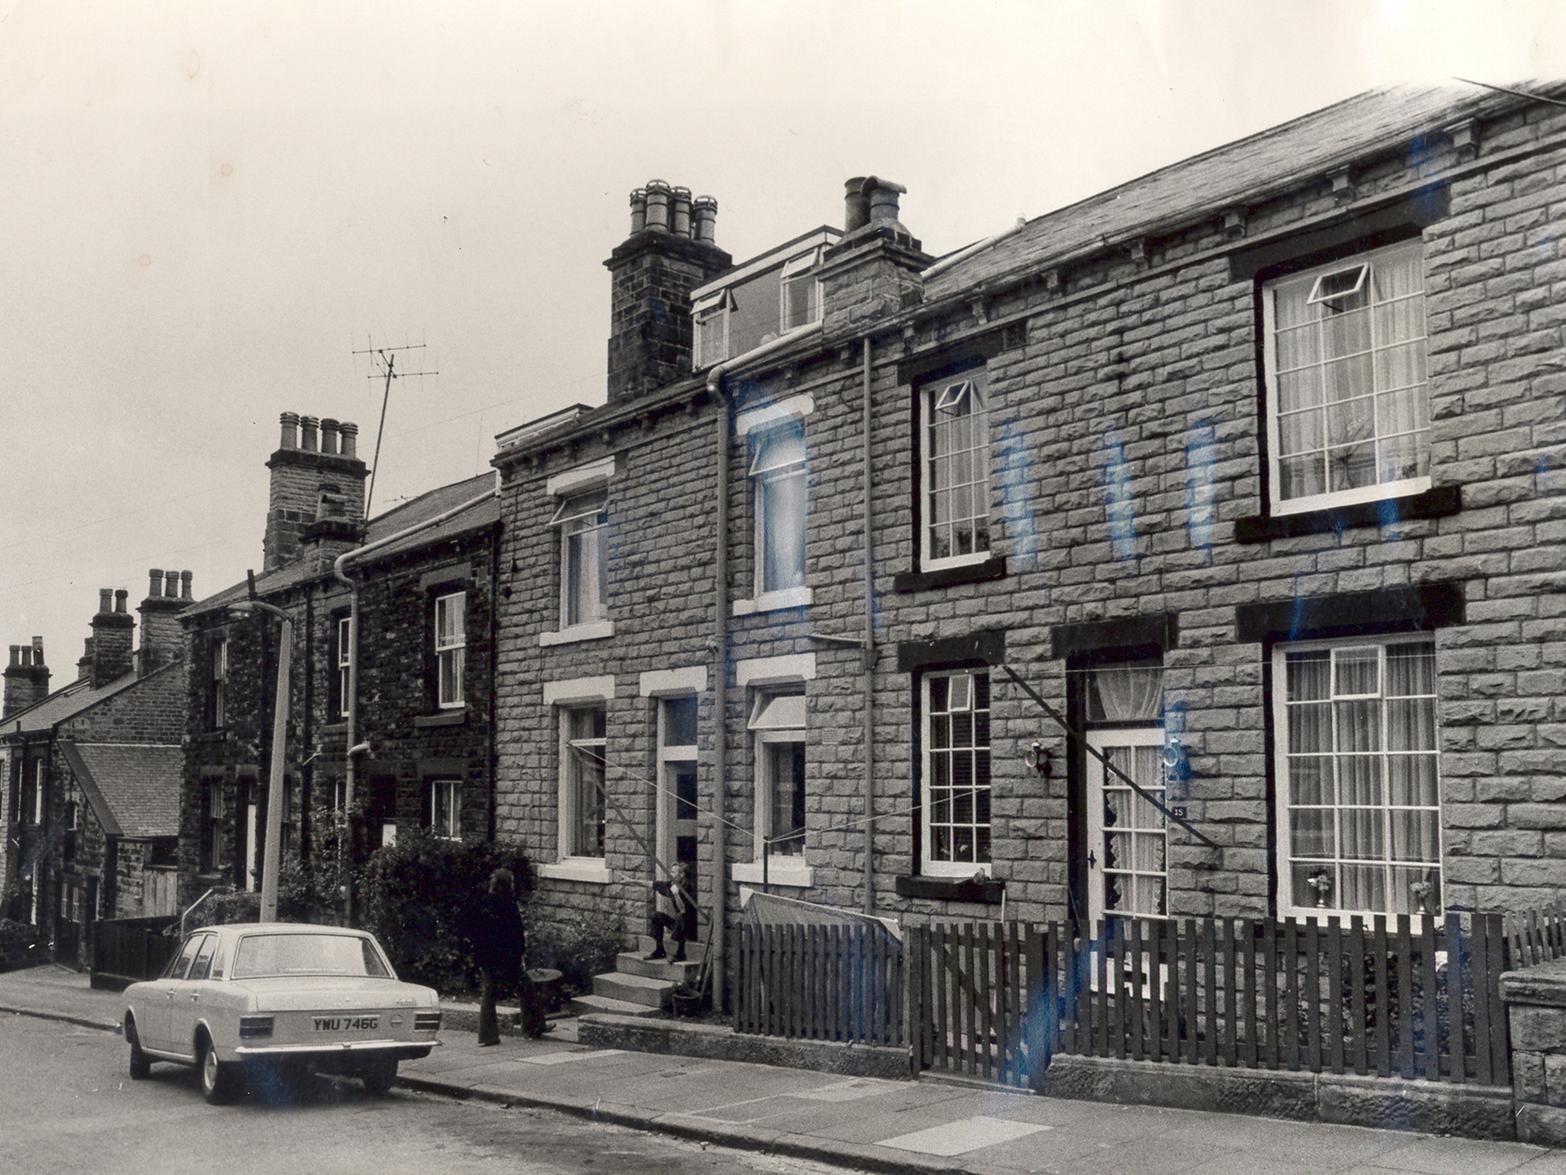 Houses on Nunthorpe Road in Rodley. Residents had already started their own environmental improvement. Leeds City Council was planning to 'initiate action towards clearance' between 1982 and 1986.